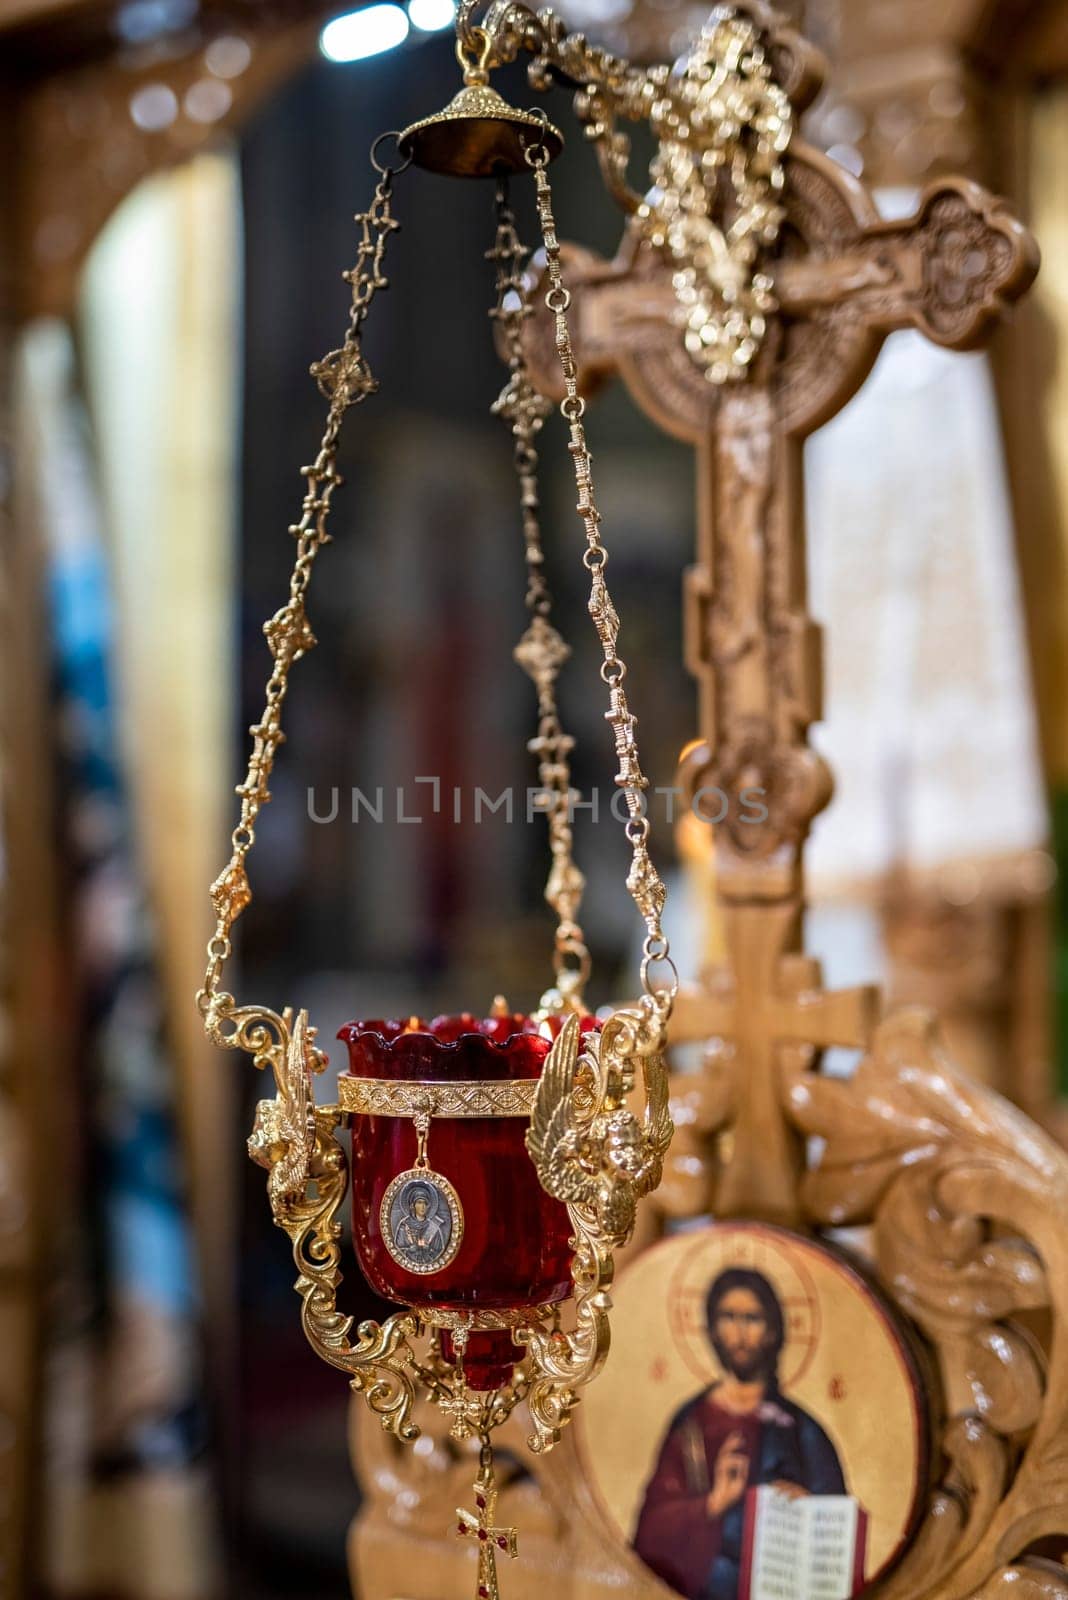 receptacle pendulum candle holder in an orthodox church orthodox baptism by carfedeph